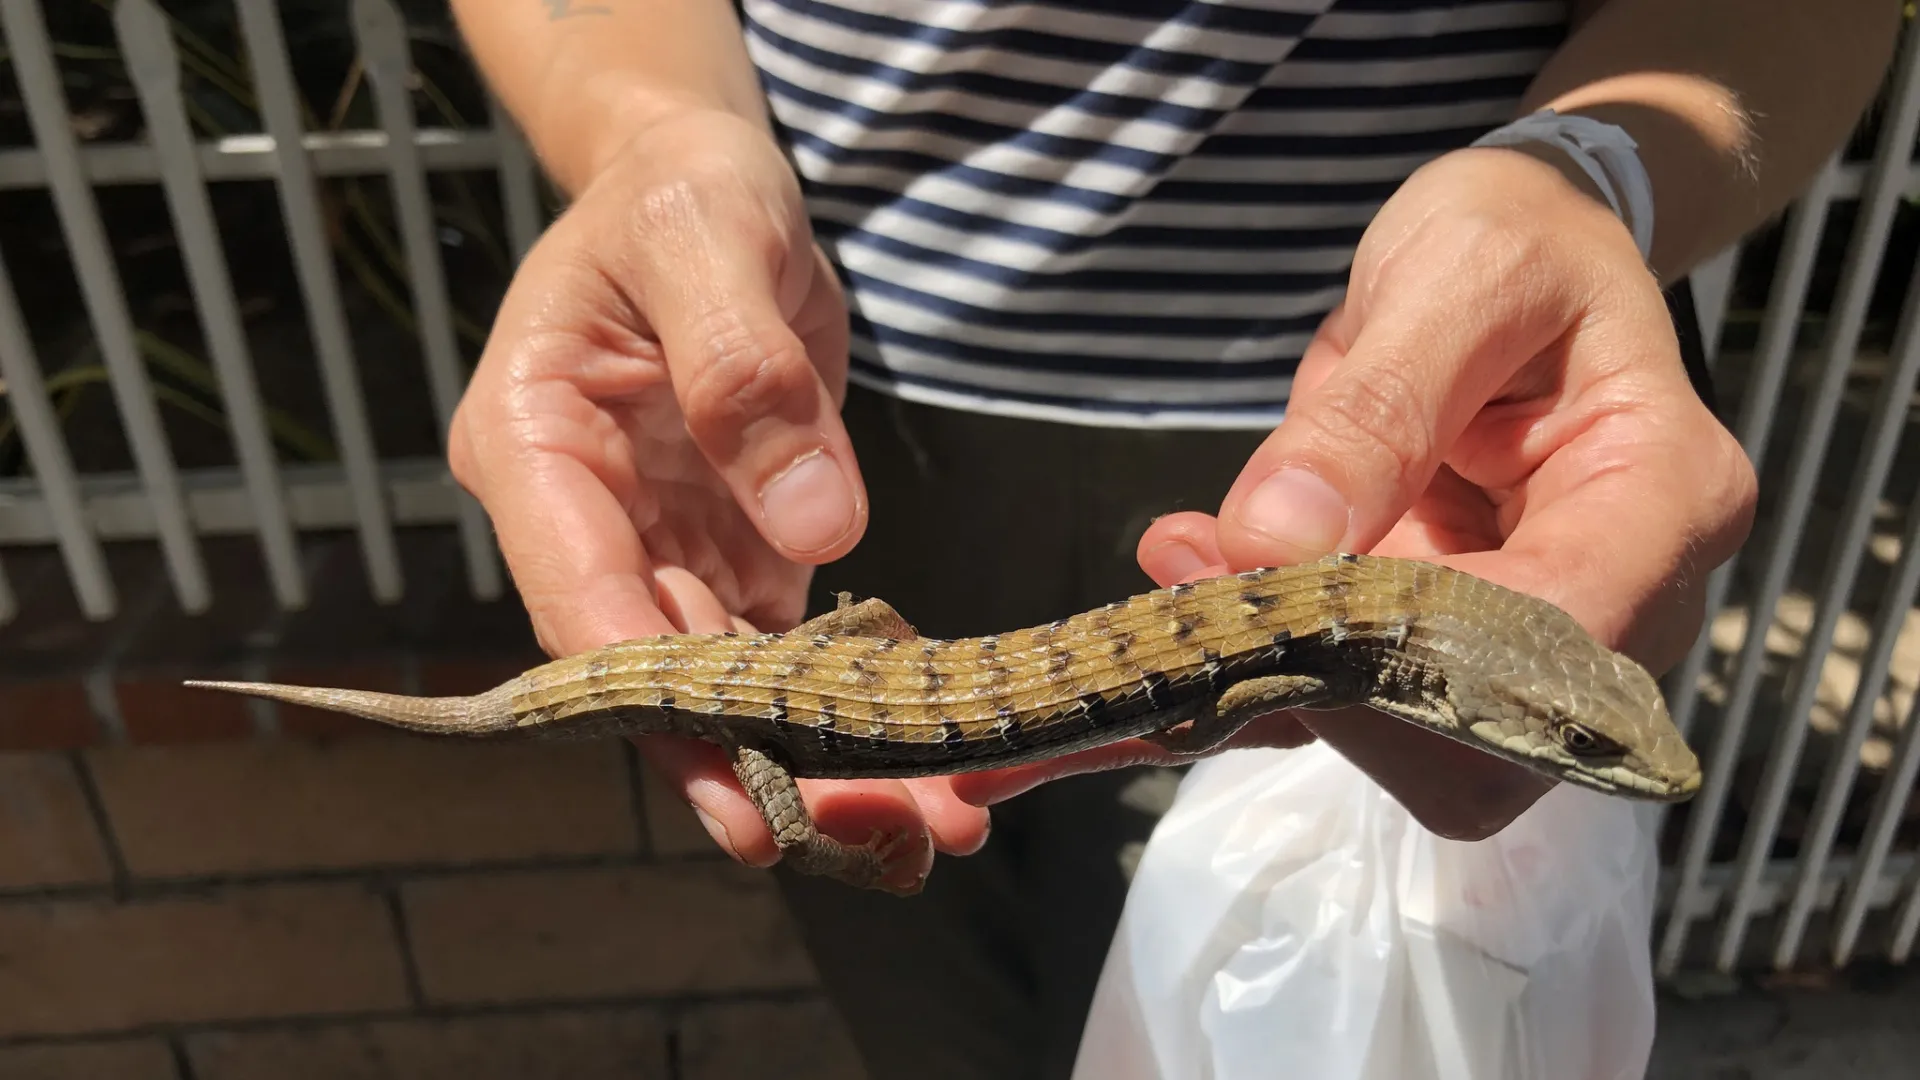 The Southern Alligator Lizard (Elgaria multicarinata) is the focus of a recently published paper co-written by Bree Putman, CSUSB assistant professor of biological sciences.